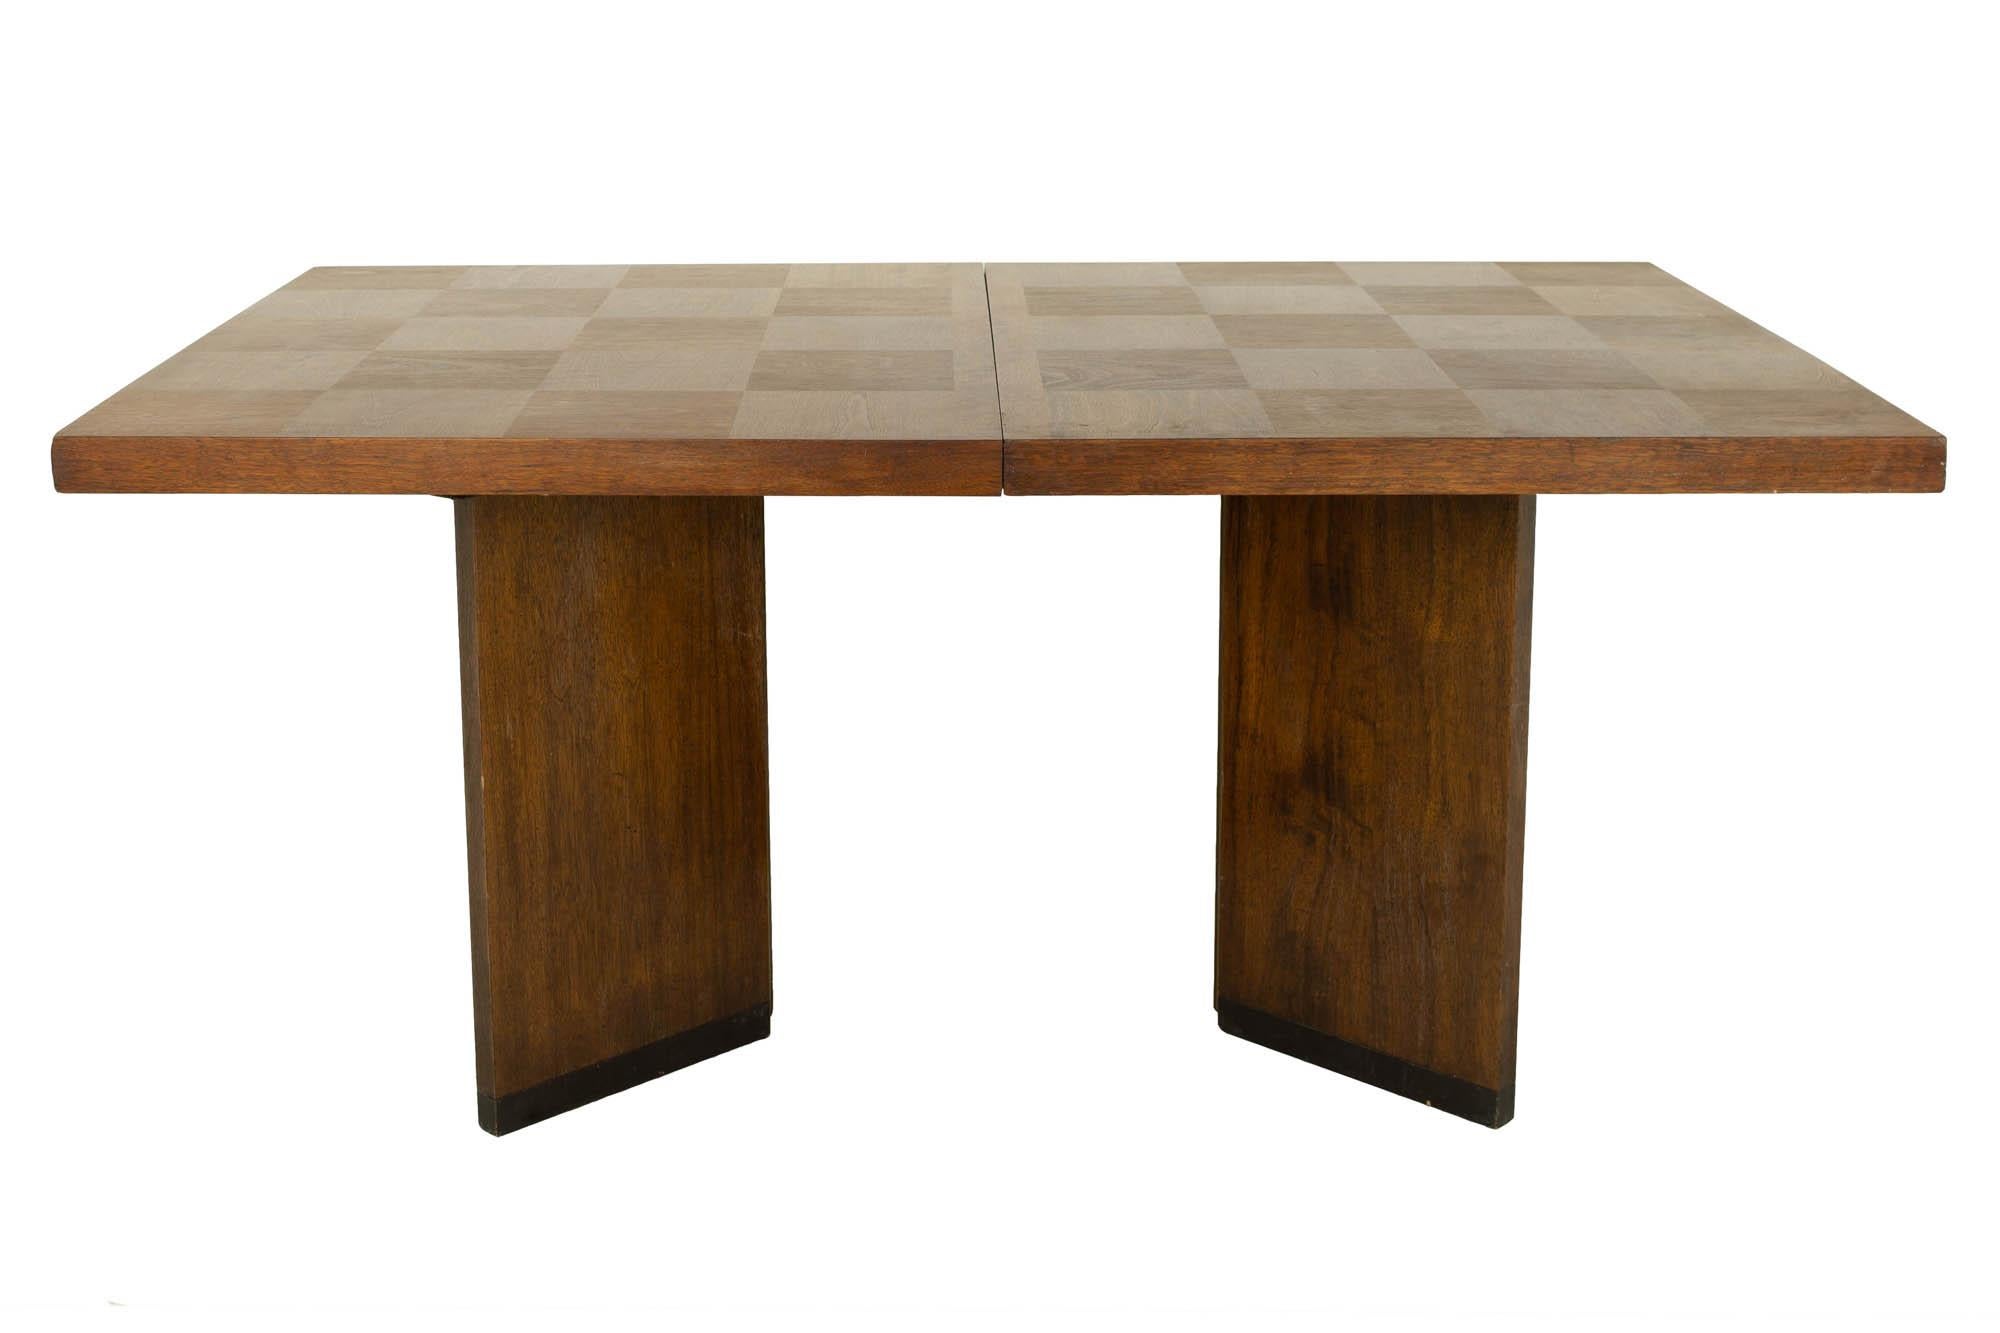 Paul Evans style lane Brutalist mid century patchwork dining table

Table measures: 62 wide x 40 deep x 29 inches high with a chair clearance of 27 inches; each leaf is 18 inches wide, making a maximum table width of 98 inches when both leaves are